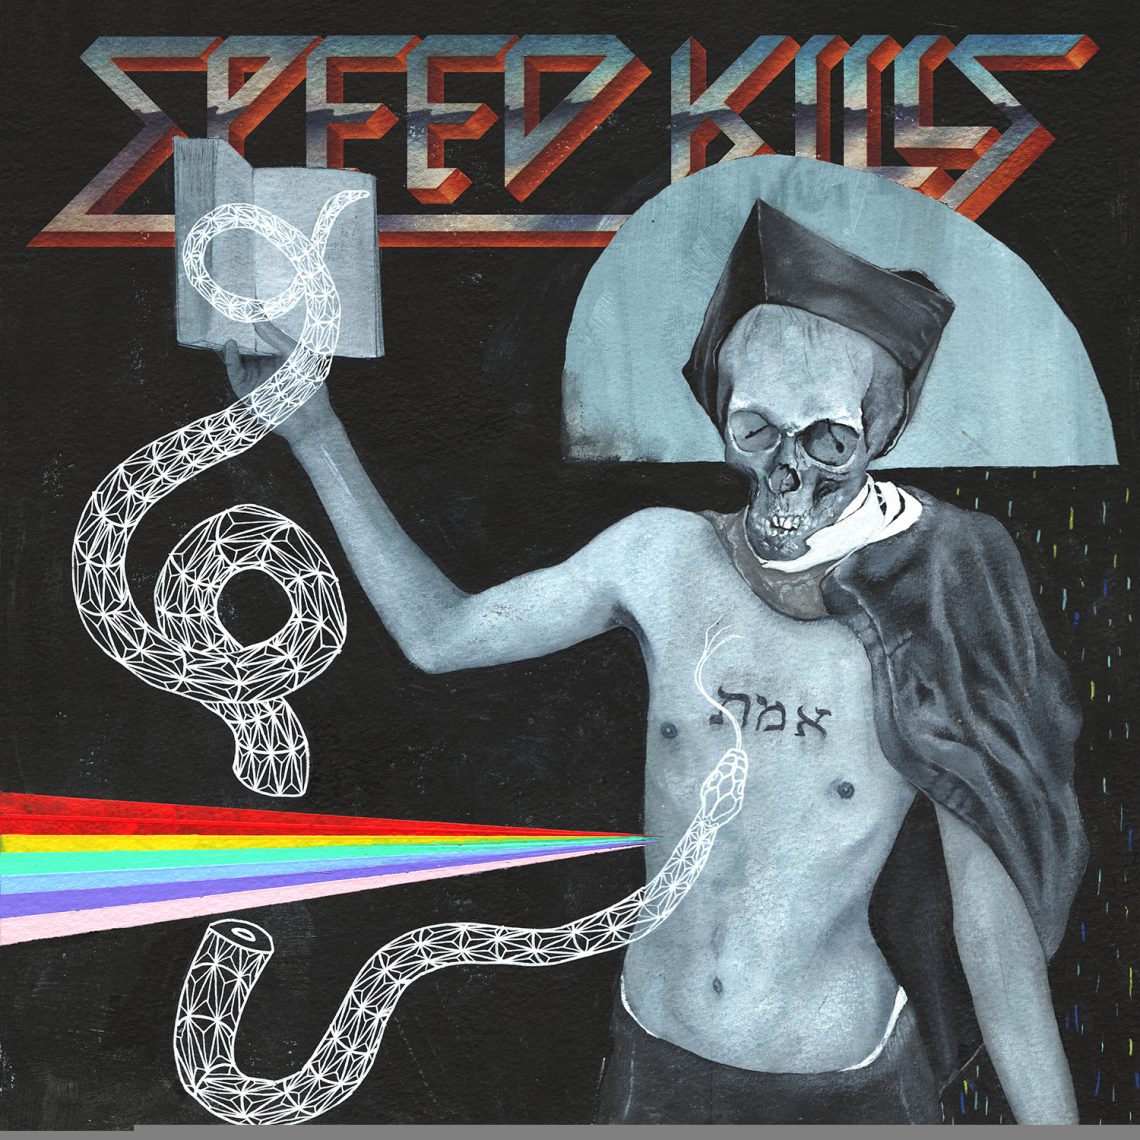 MUSIC FOR NATIONS ANNOUNCE SPEED KILLS VII